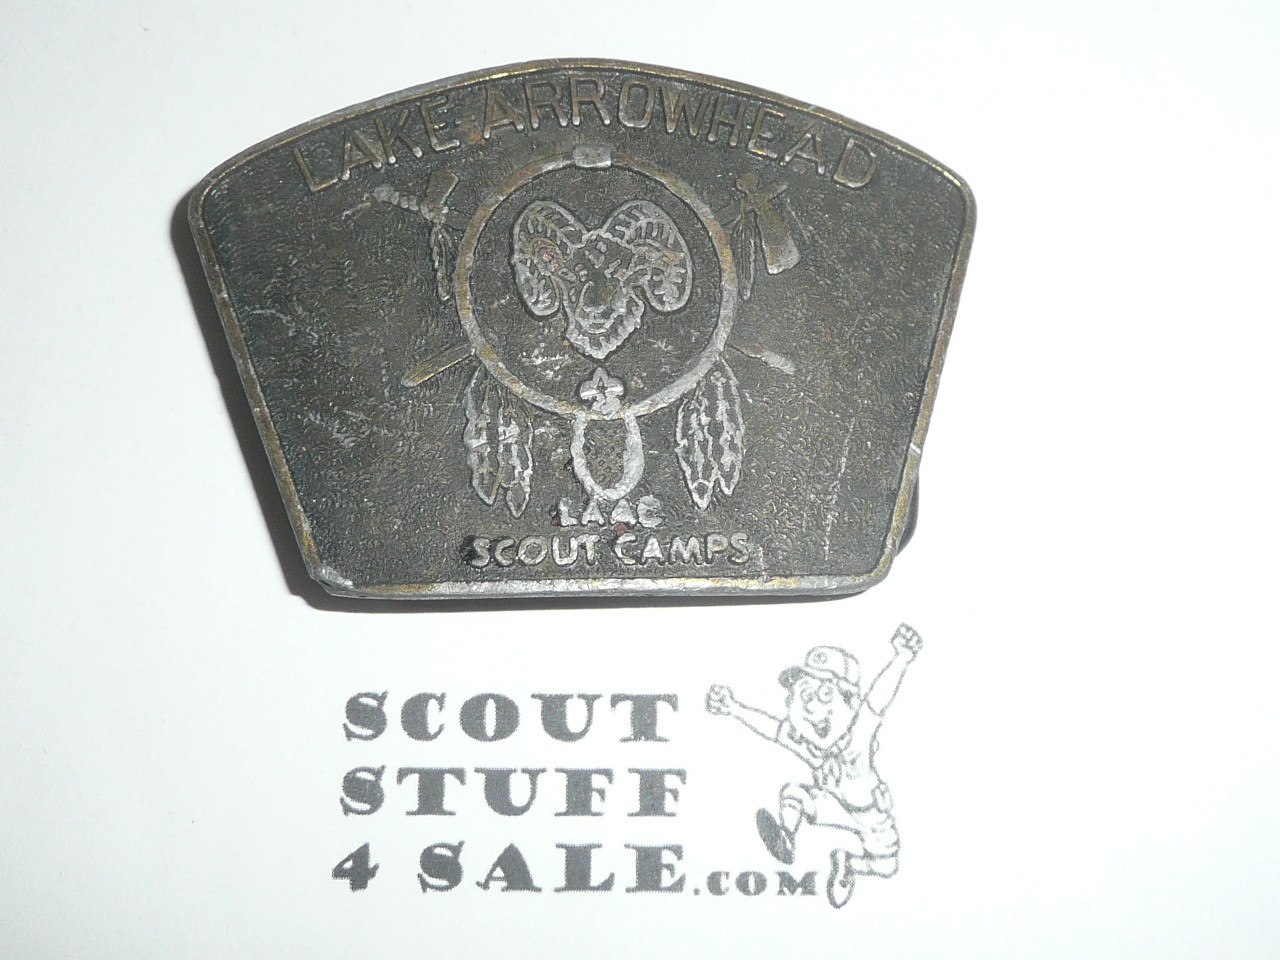 Lake Arrowhead Scout Camps Cast Belt Buckle, Los Angeles Area Council, Early